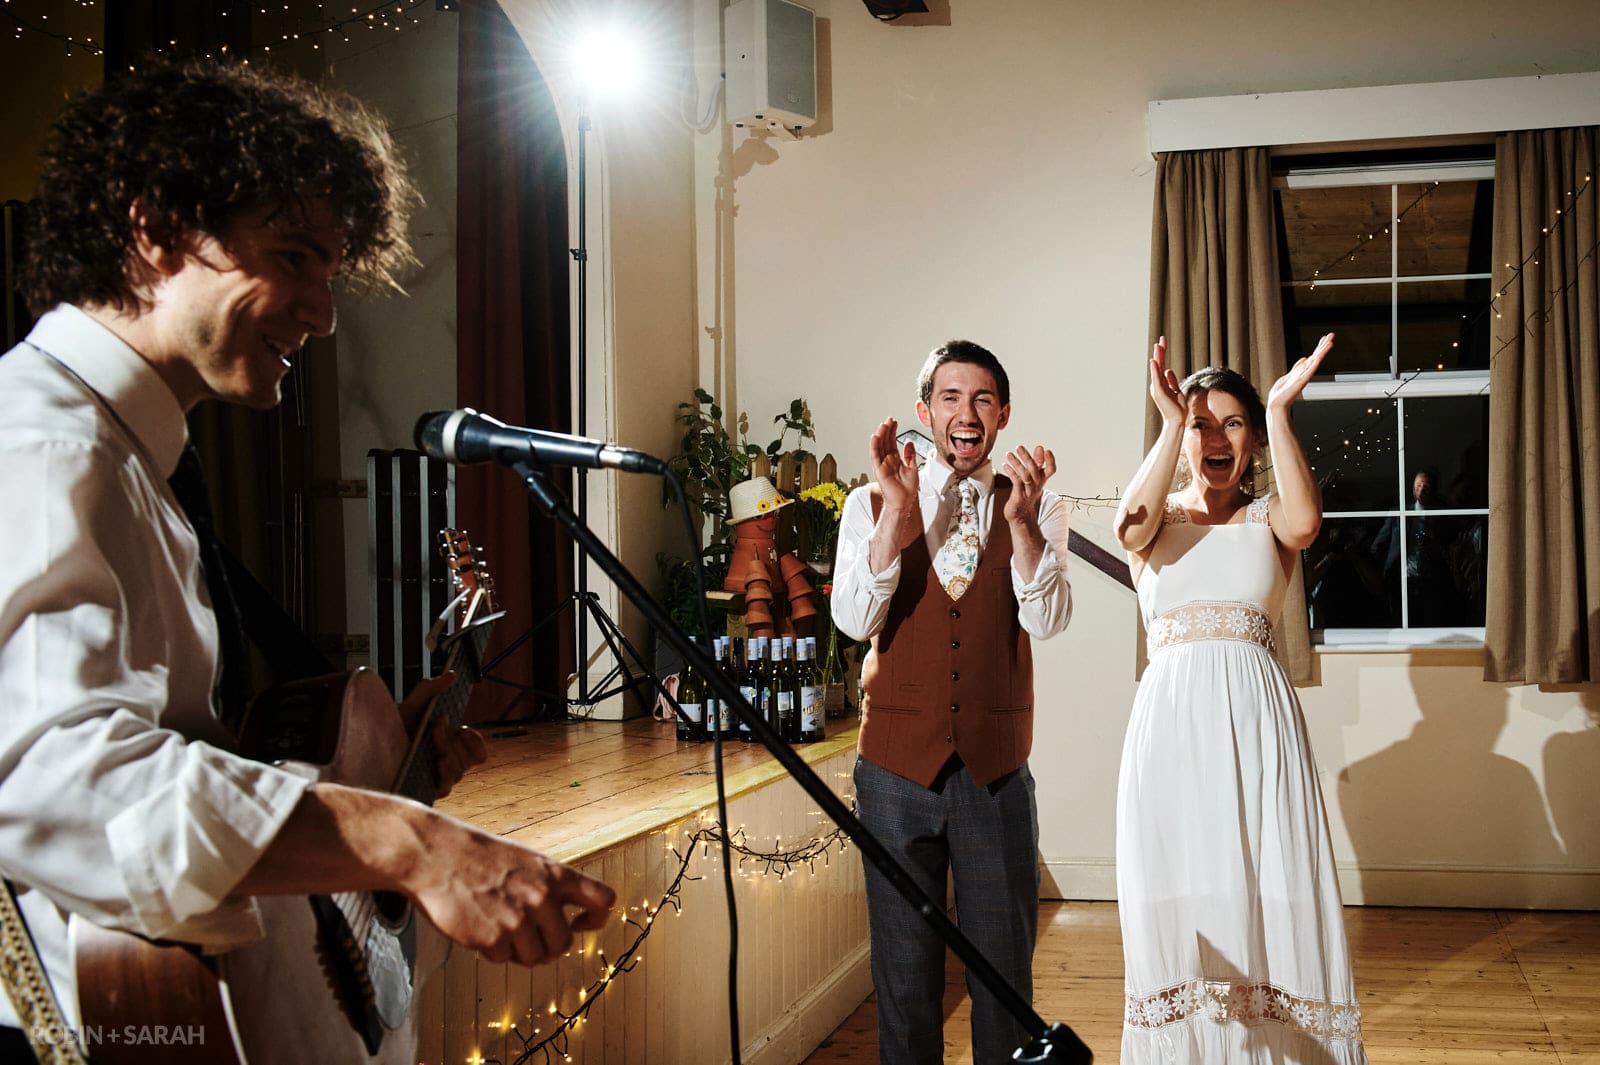 Bride and groom clap and cheer at live music performance at their wedding in village hall